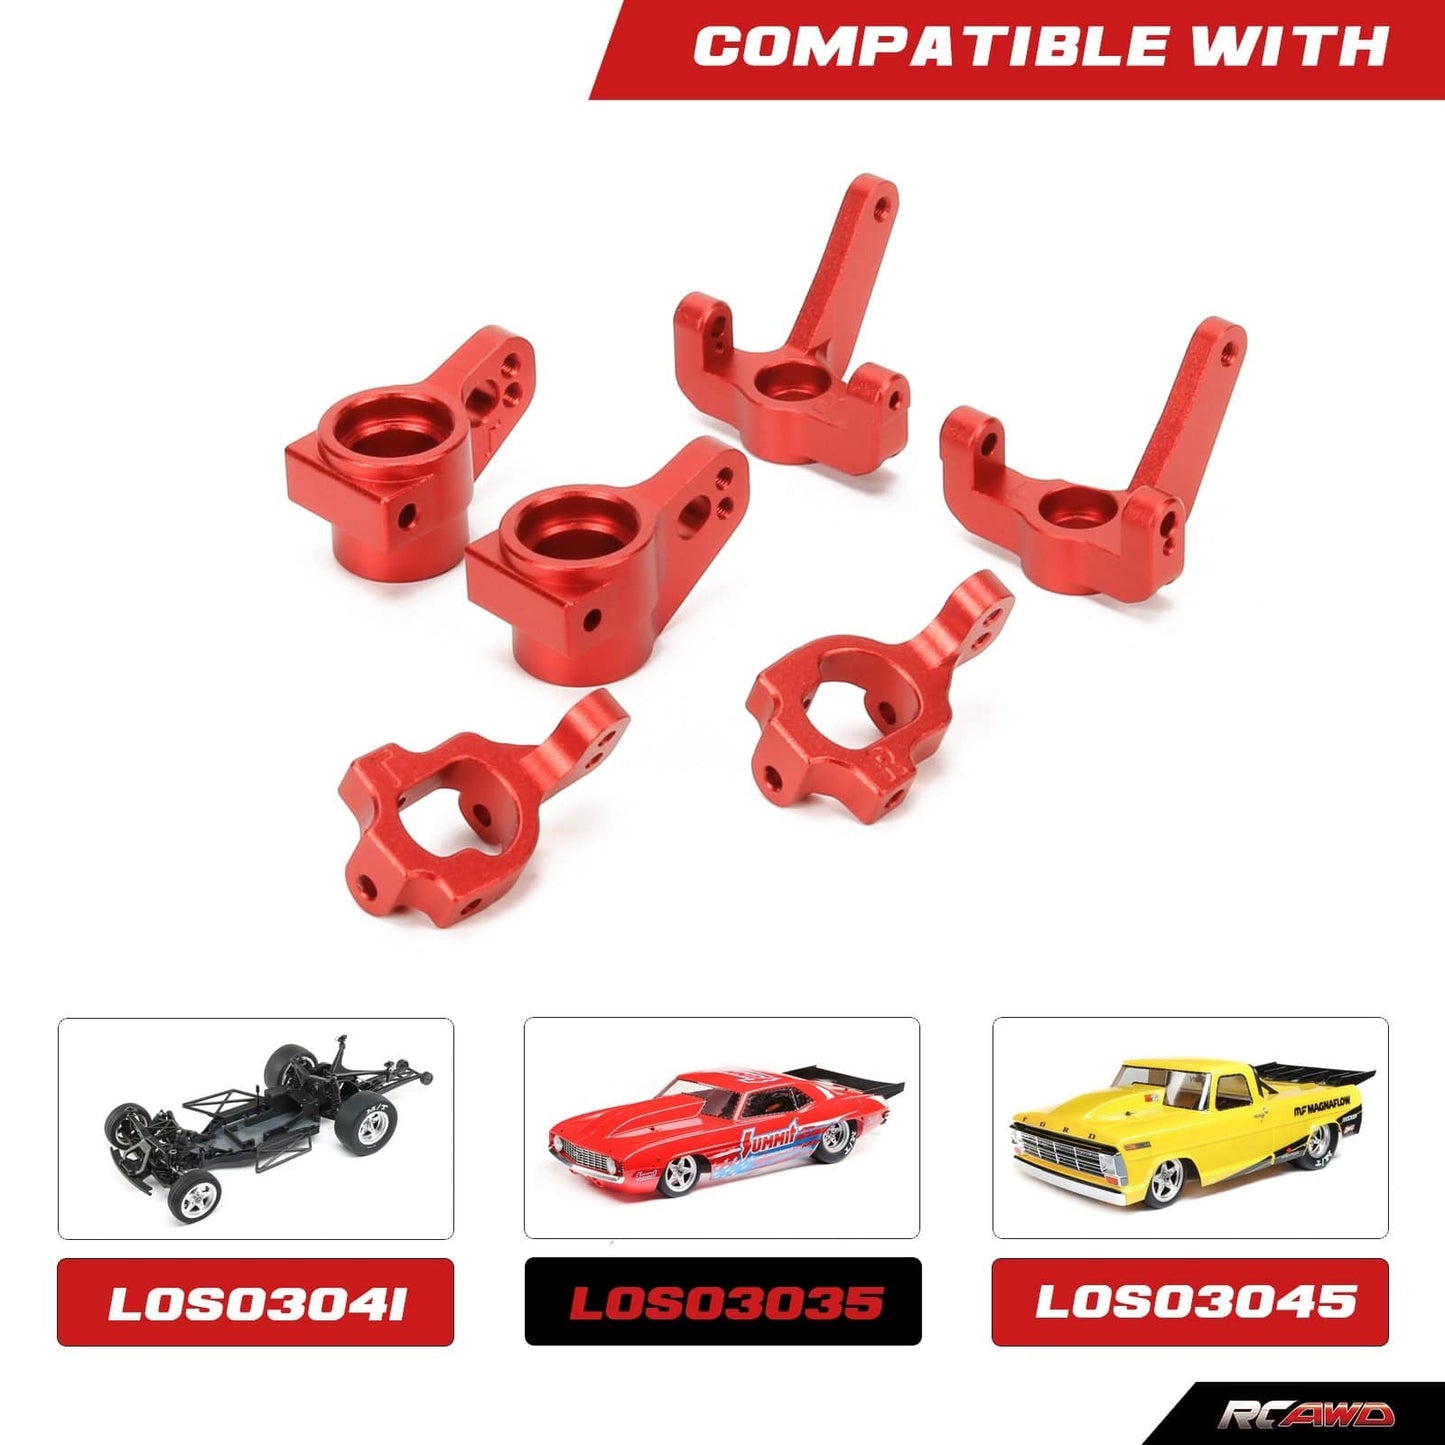 RCAWD Losi 22S RCAWD Losi 22s Upgrades Caster Block Set & Rear Hub Set & Front Spindle Set 6pcs for Camaro Ford F100